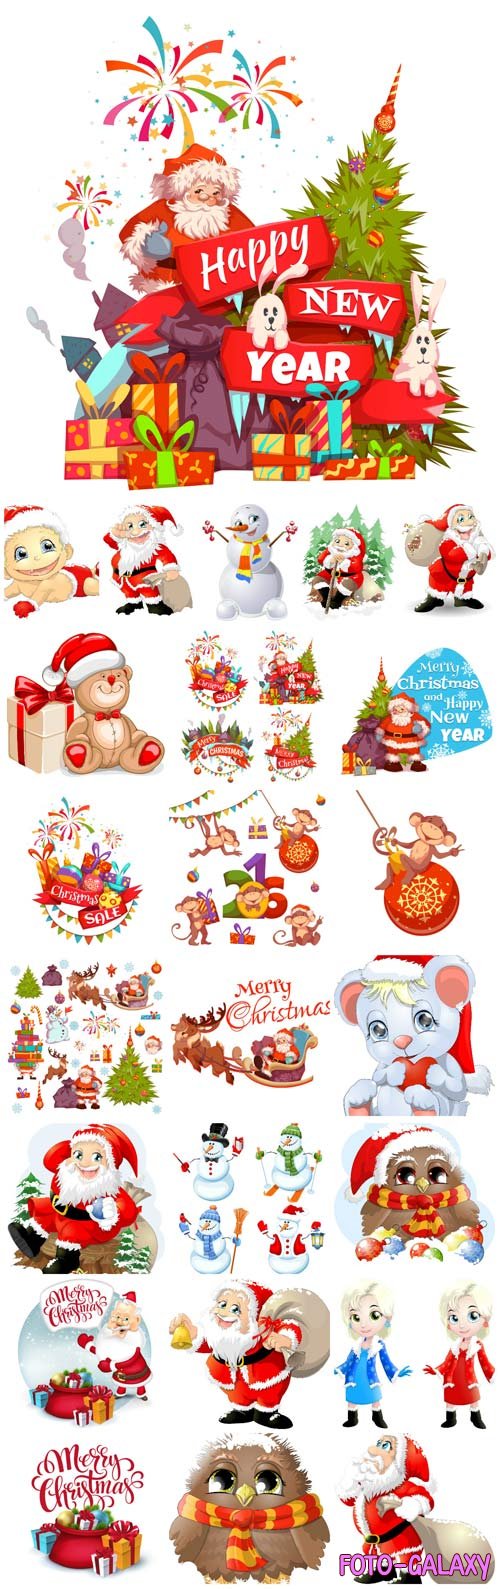 New Year and Christmas illustrations in vector 42